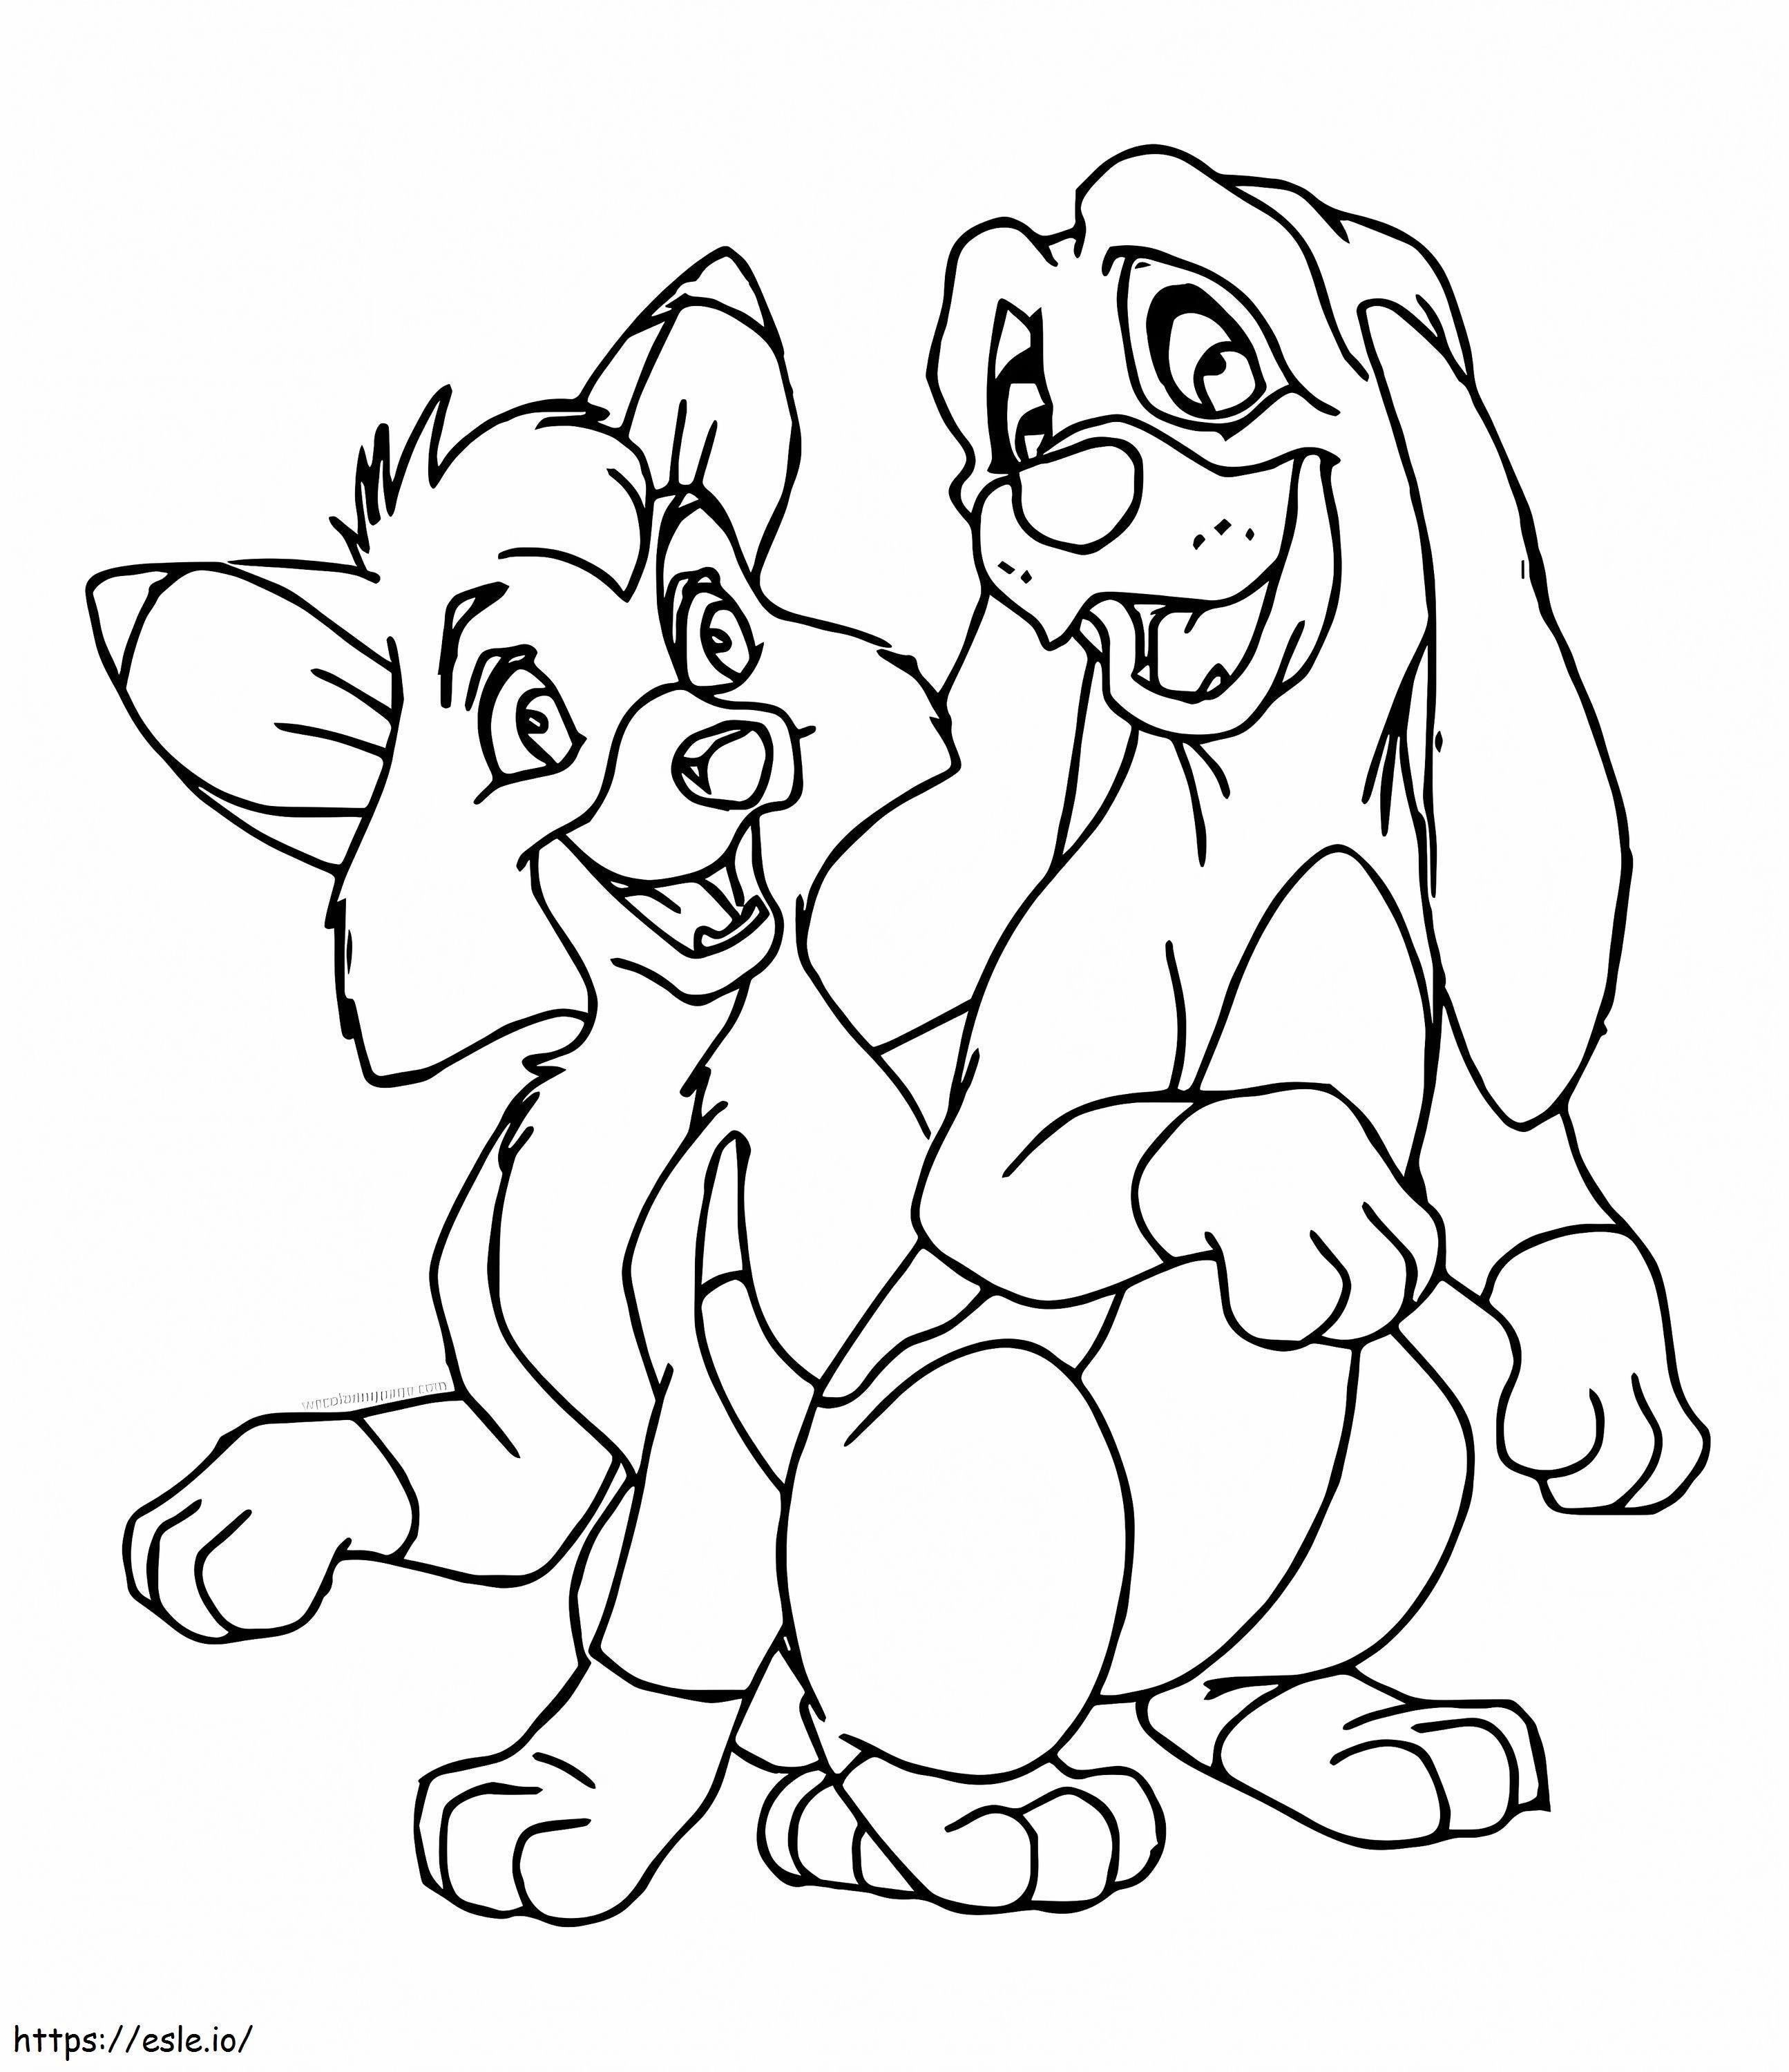 Fox And The Hound 1 coloring page